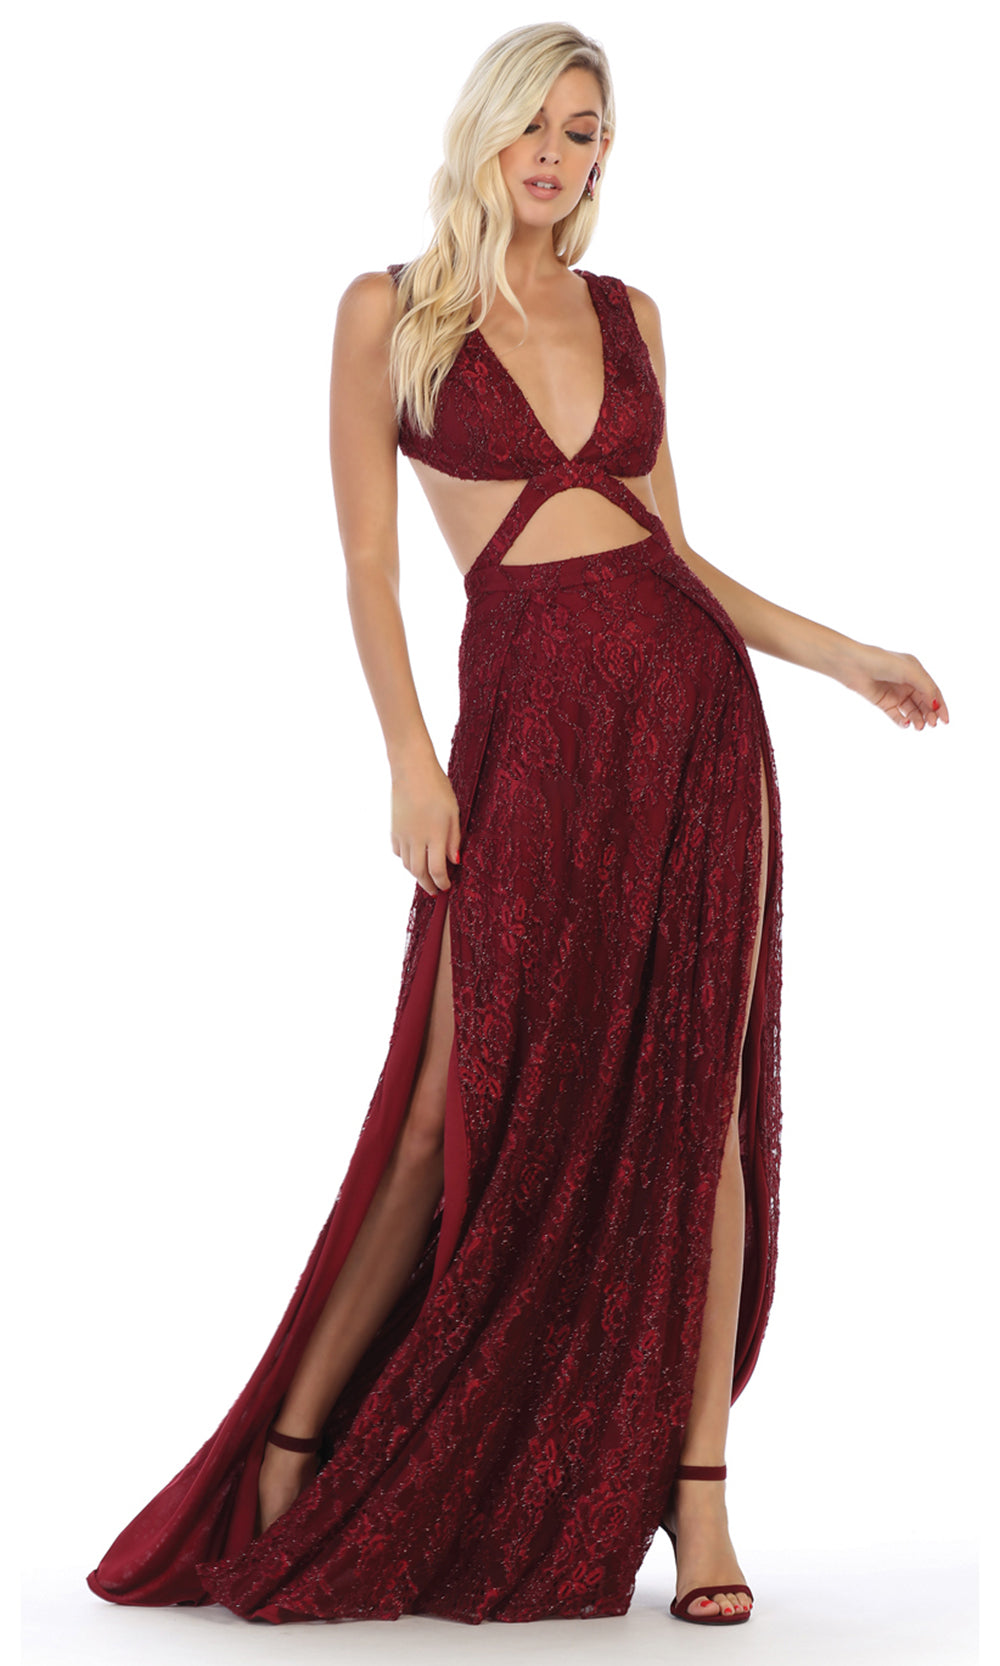 May Queen - RQ7736 Sleek And Sexy Double Slit Dress In Red and Black